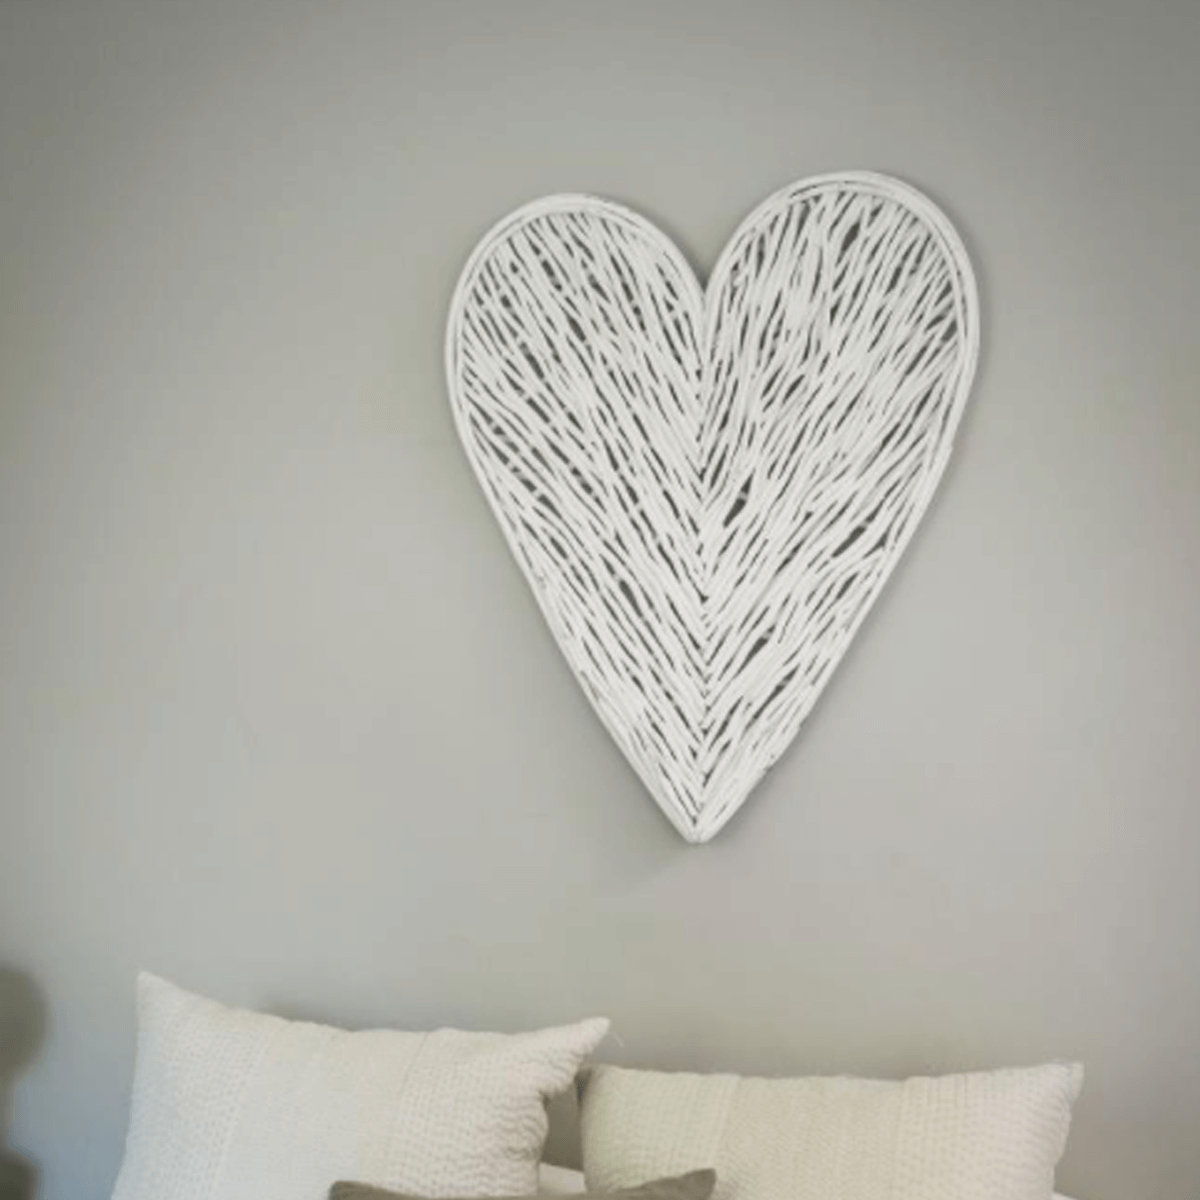 Extra Large White Wicker Heart